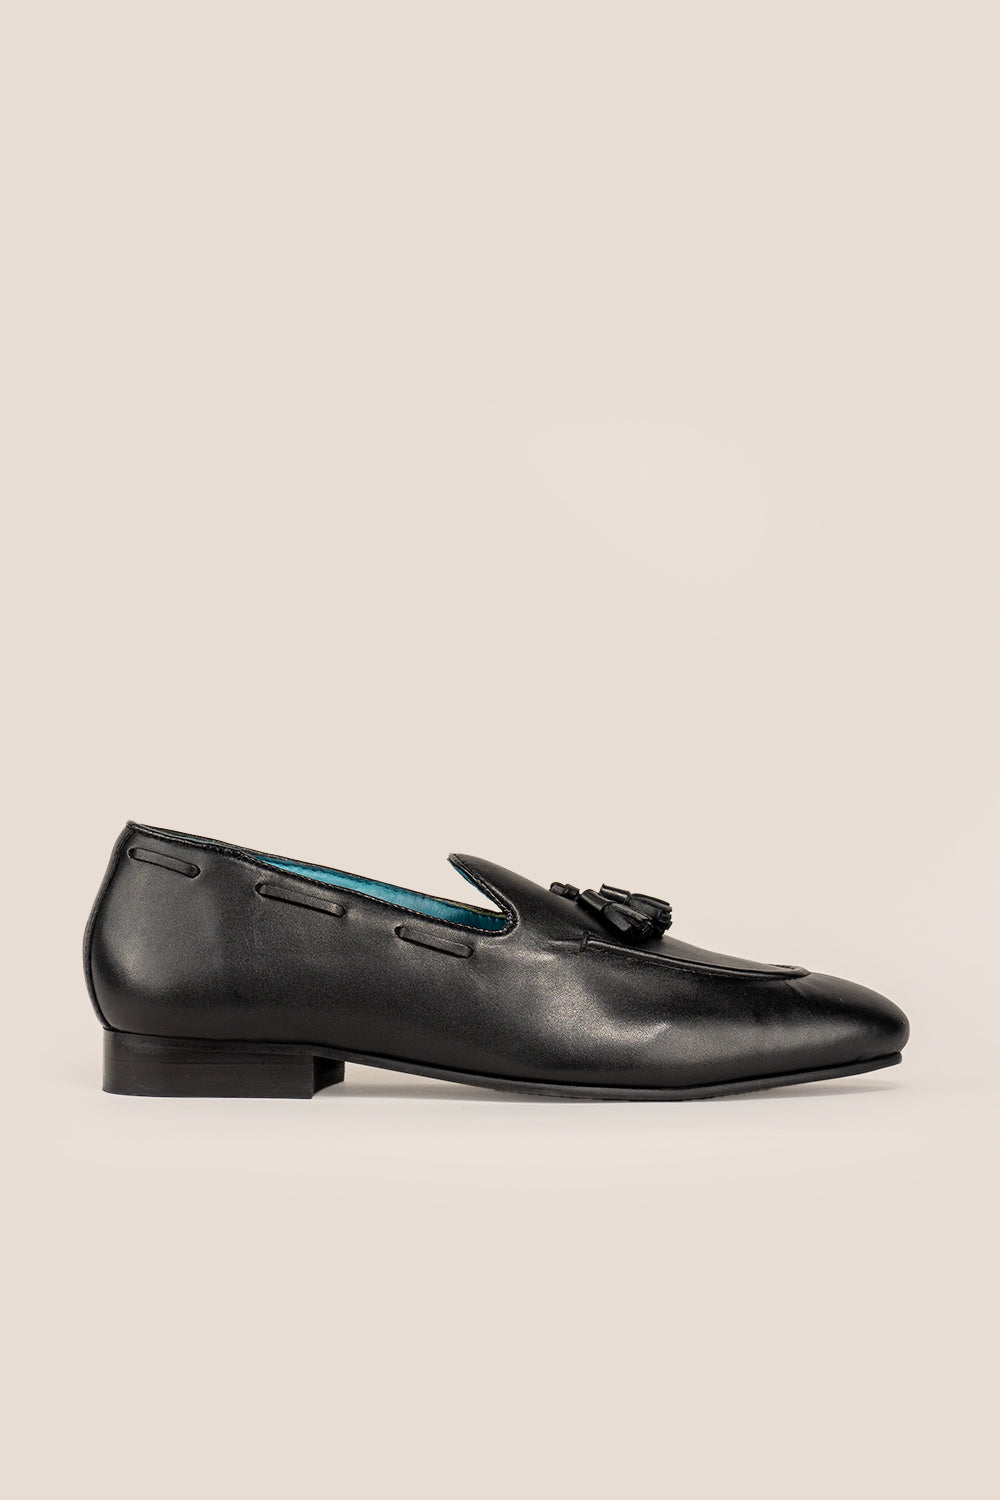 Alvin Black Leather Loafers Oswin Hyde